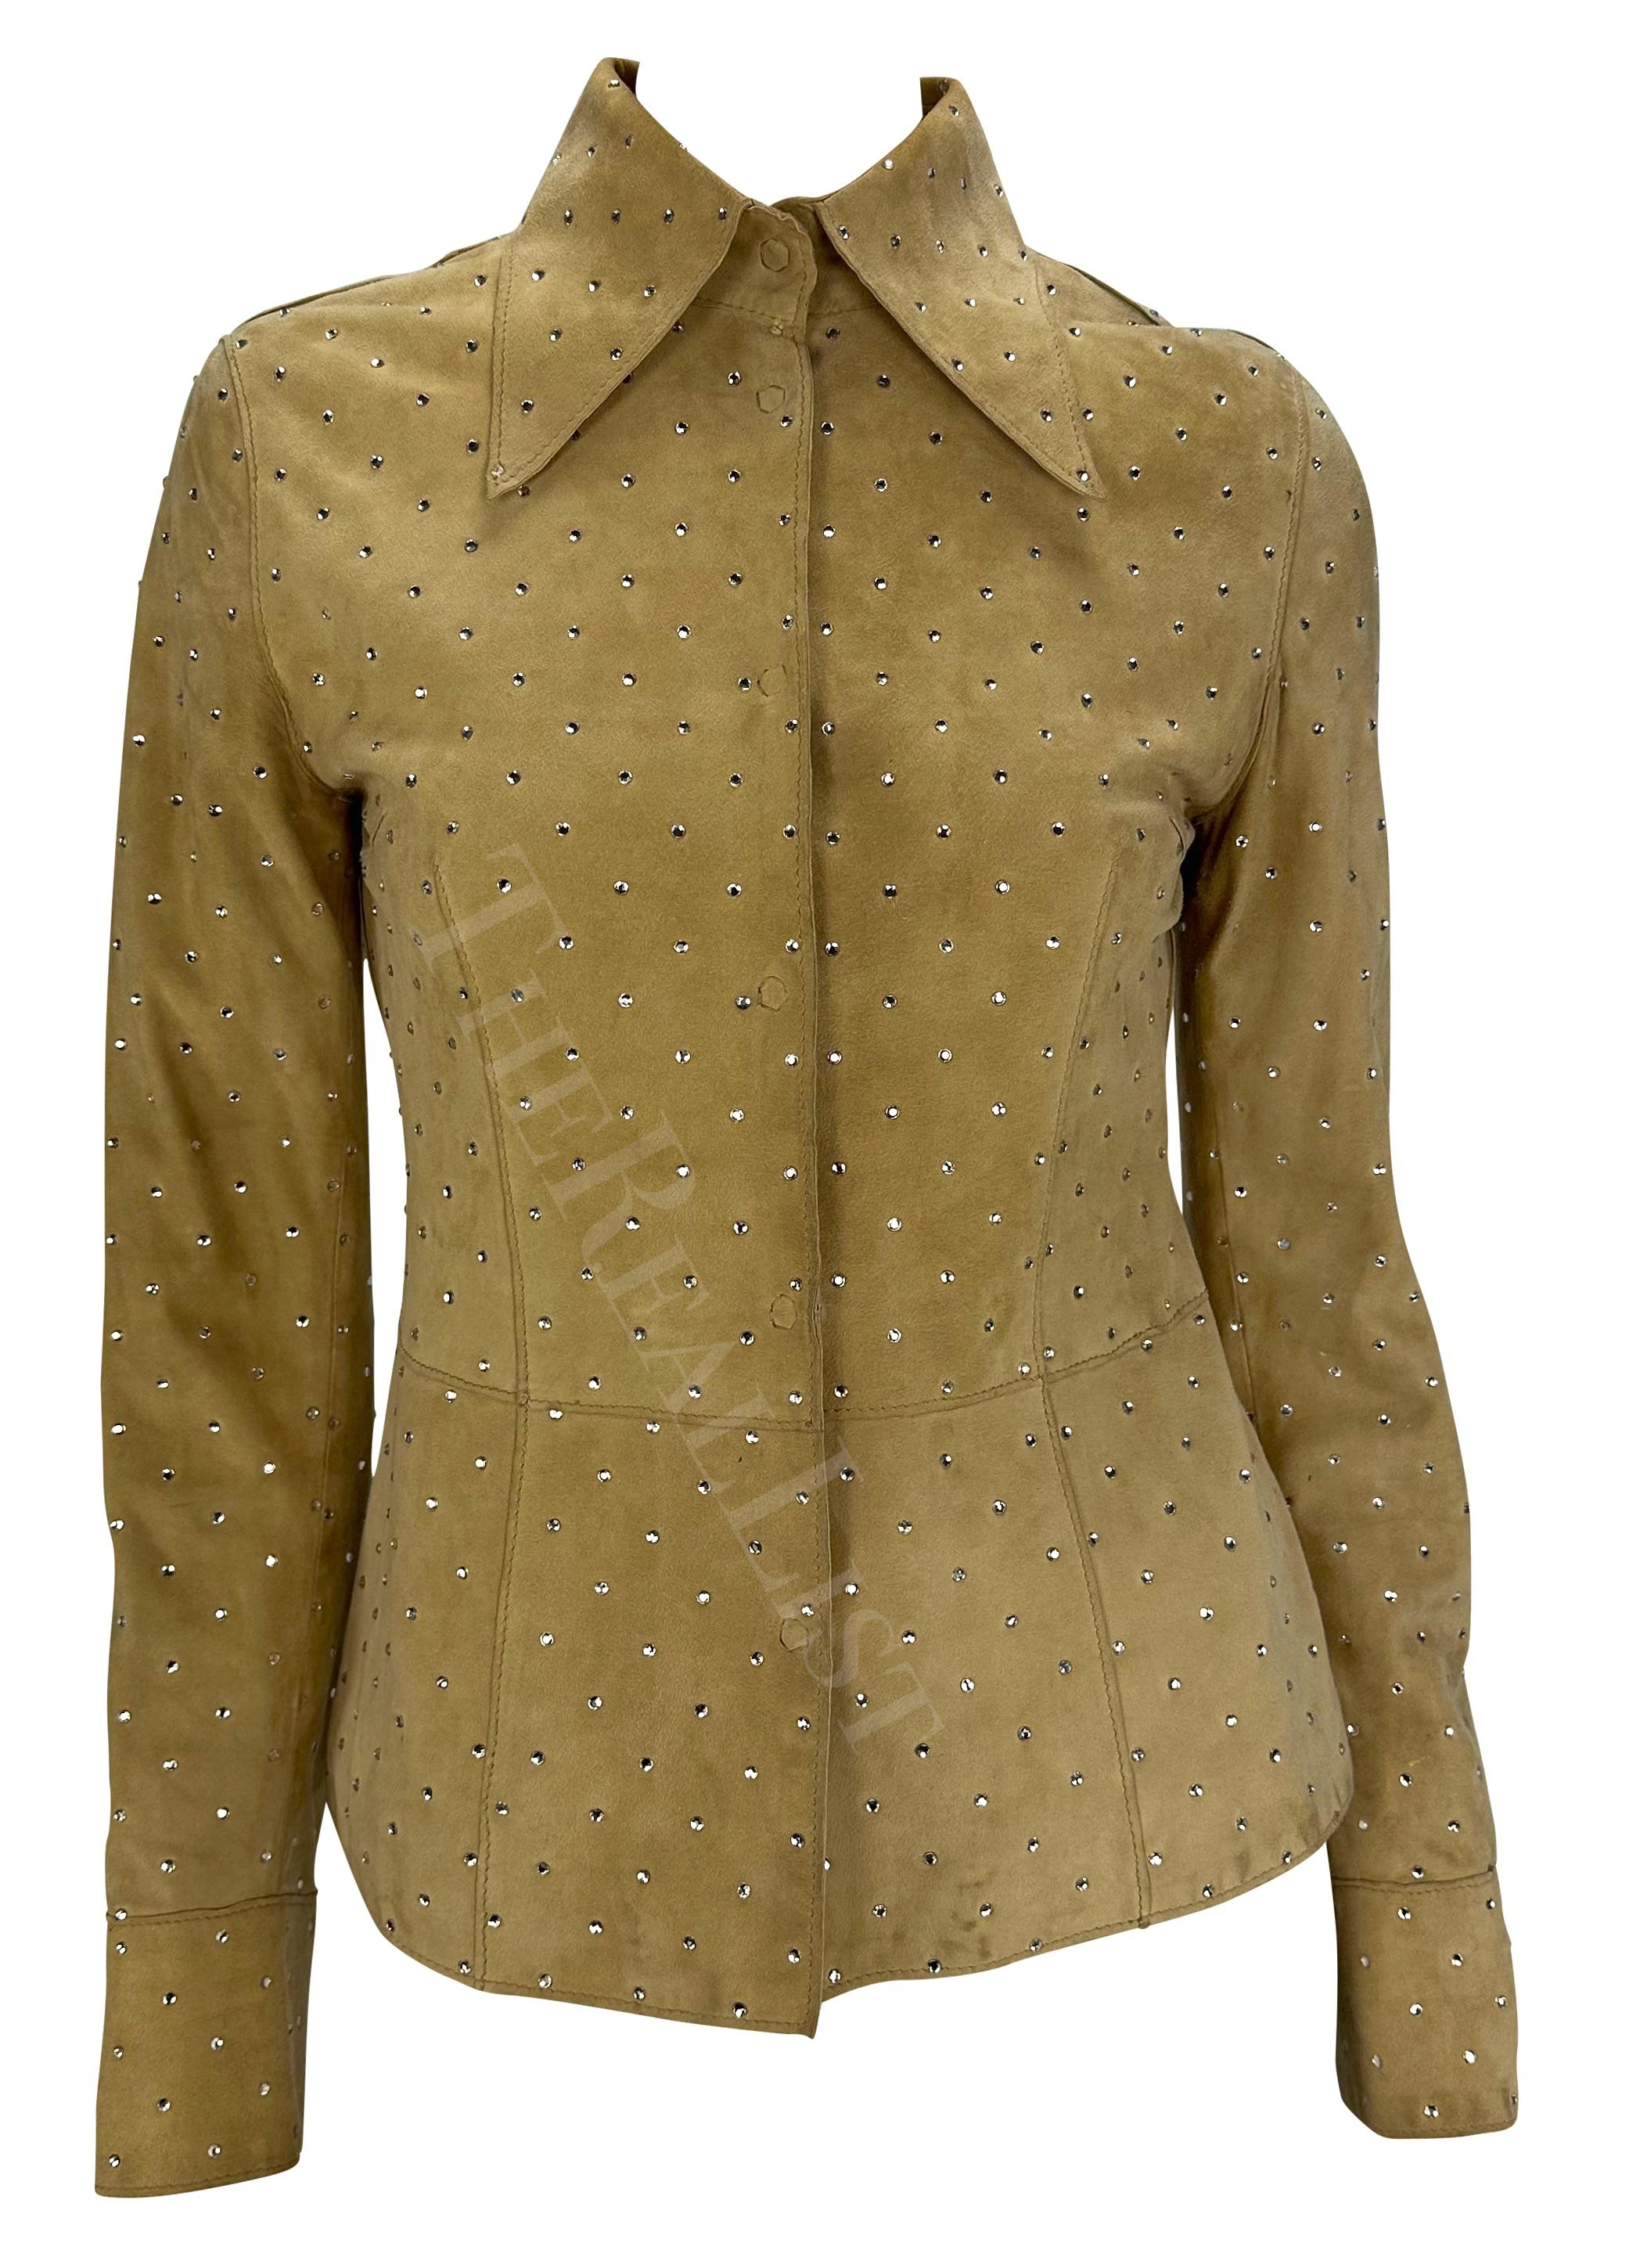 Presenting a tan suede Dolce and Gabbana collared jacket/top. From the Fall/Winter 2000 collection, this jacket is constructed entirely of suede and is accented with rhinestones throughout. Made complete with snap closures, this flashy Dolce and